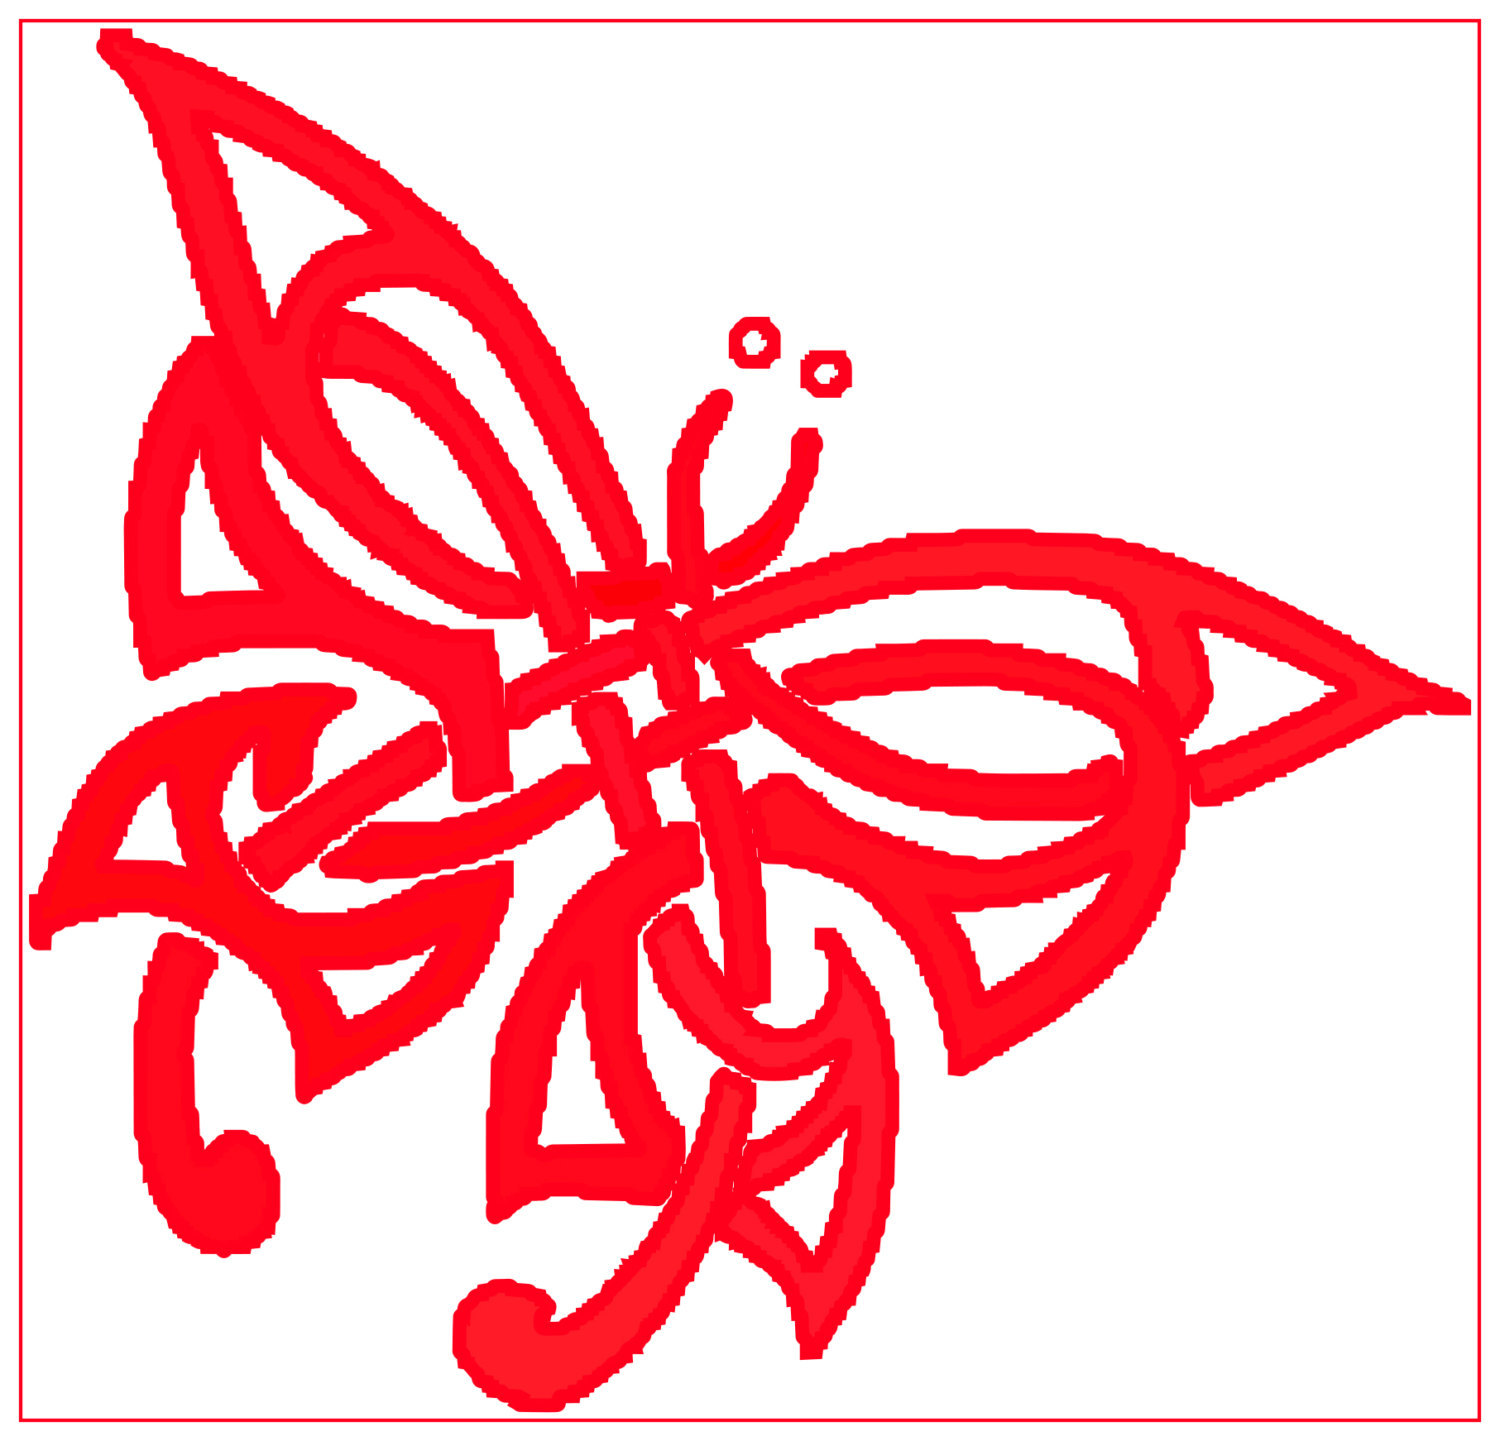 Outdoor tribal butterfly decal sticker ready to apply 6 inch window decals